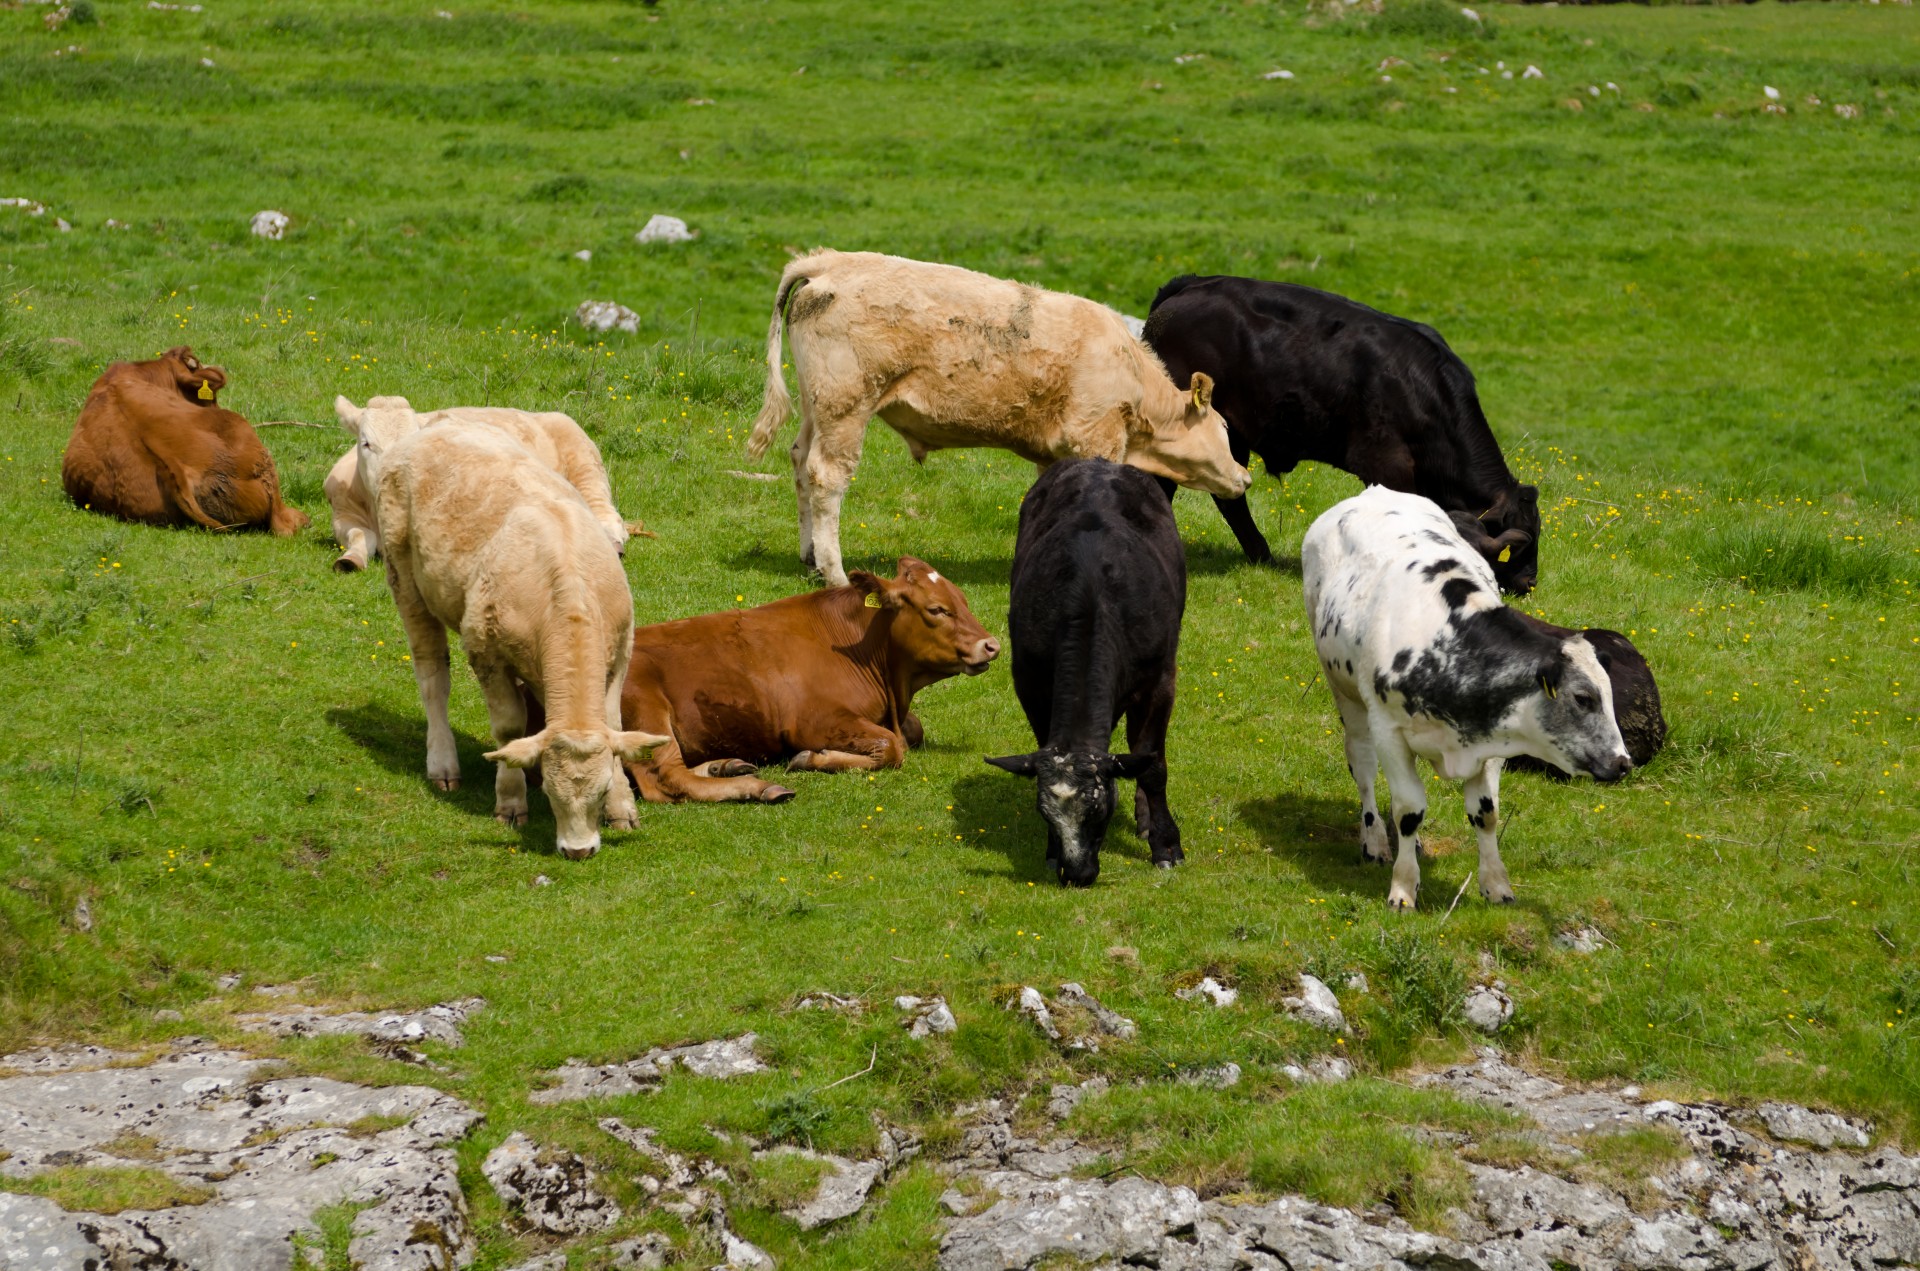 Download Cow Field Livestock Free Photo.